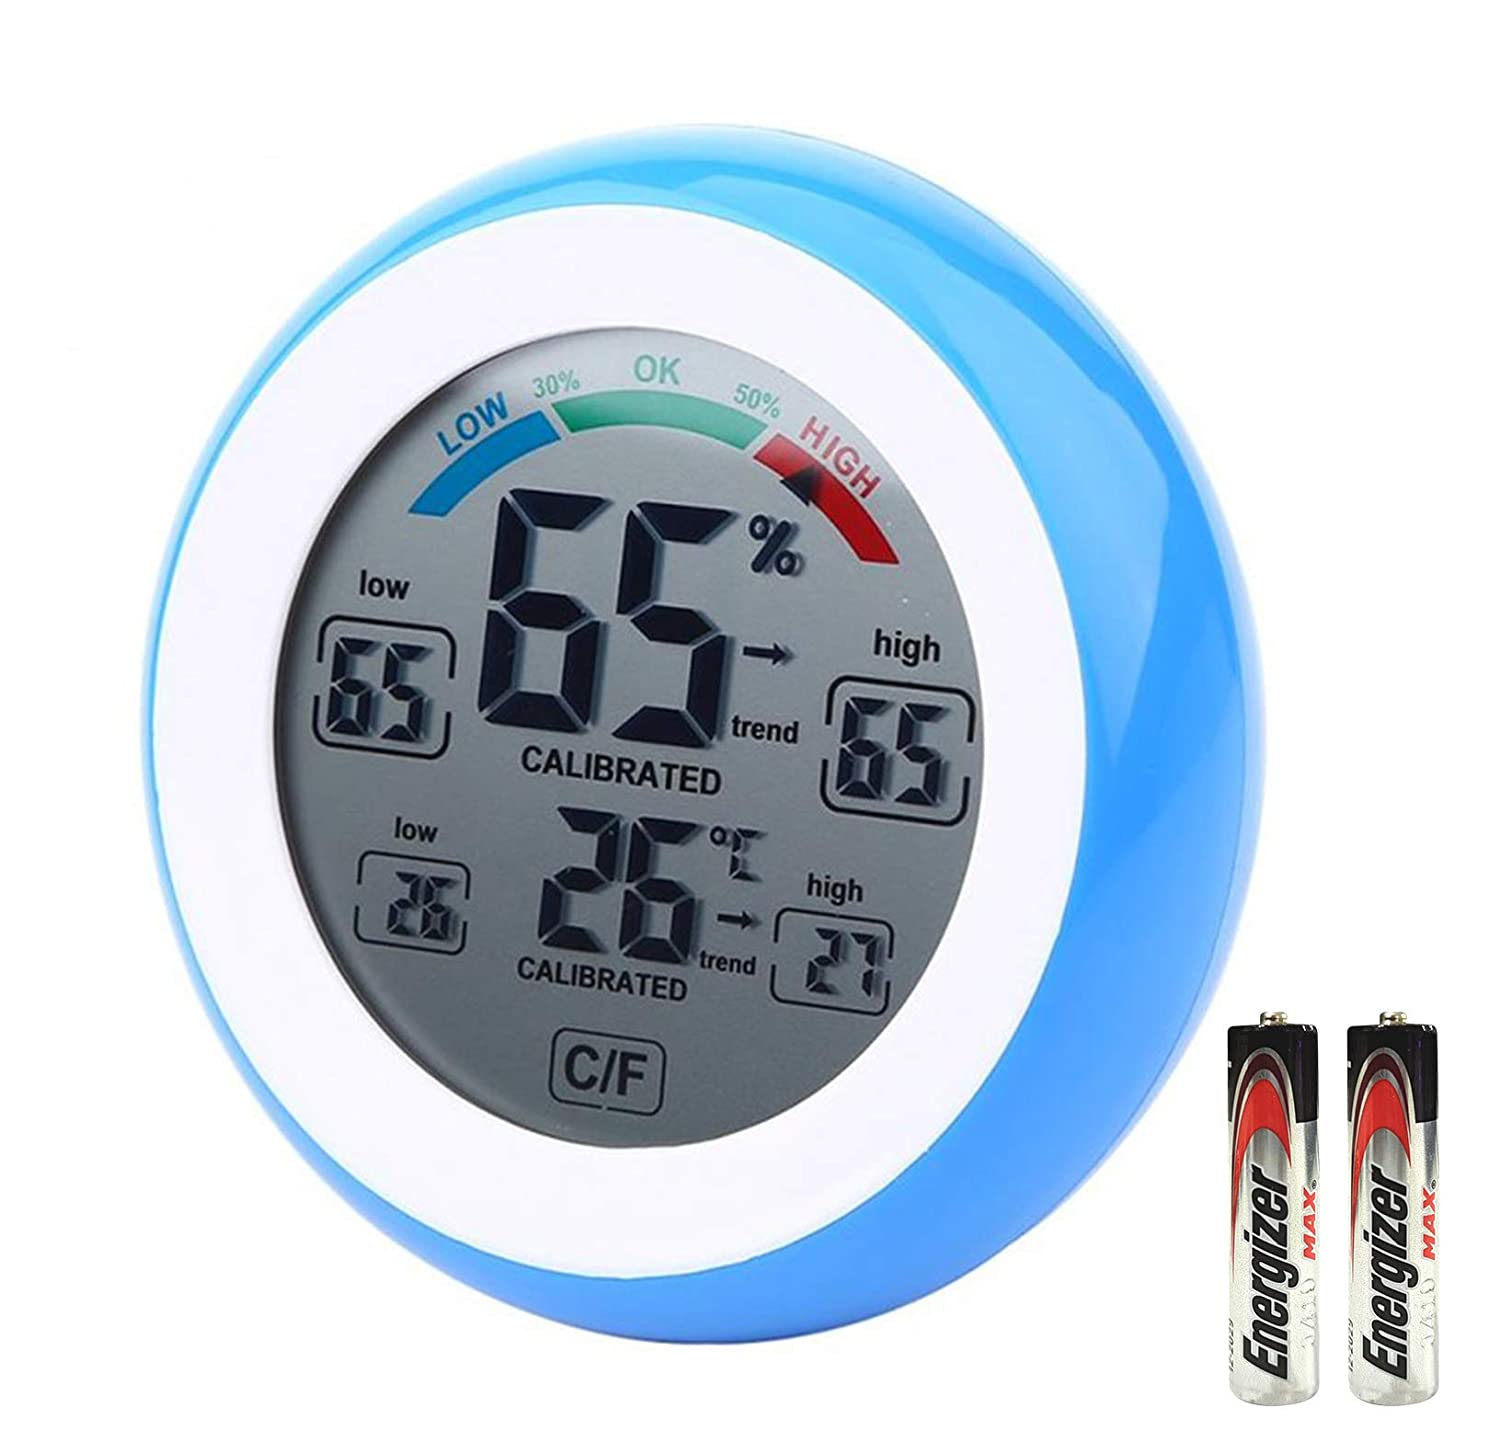 AMICIKART Waterproof Digital Shower Thermometer Auto Power Off Accurate  Meter For measuring water temperature Shower Thermometer Thermometer -  AMICIKART 